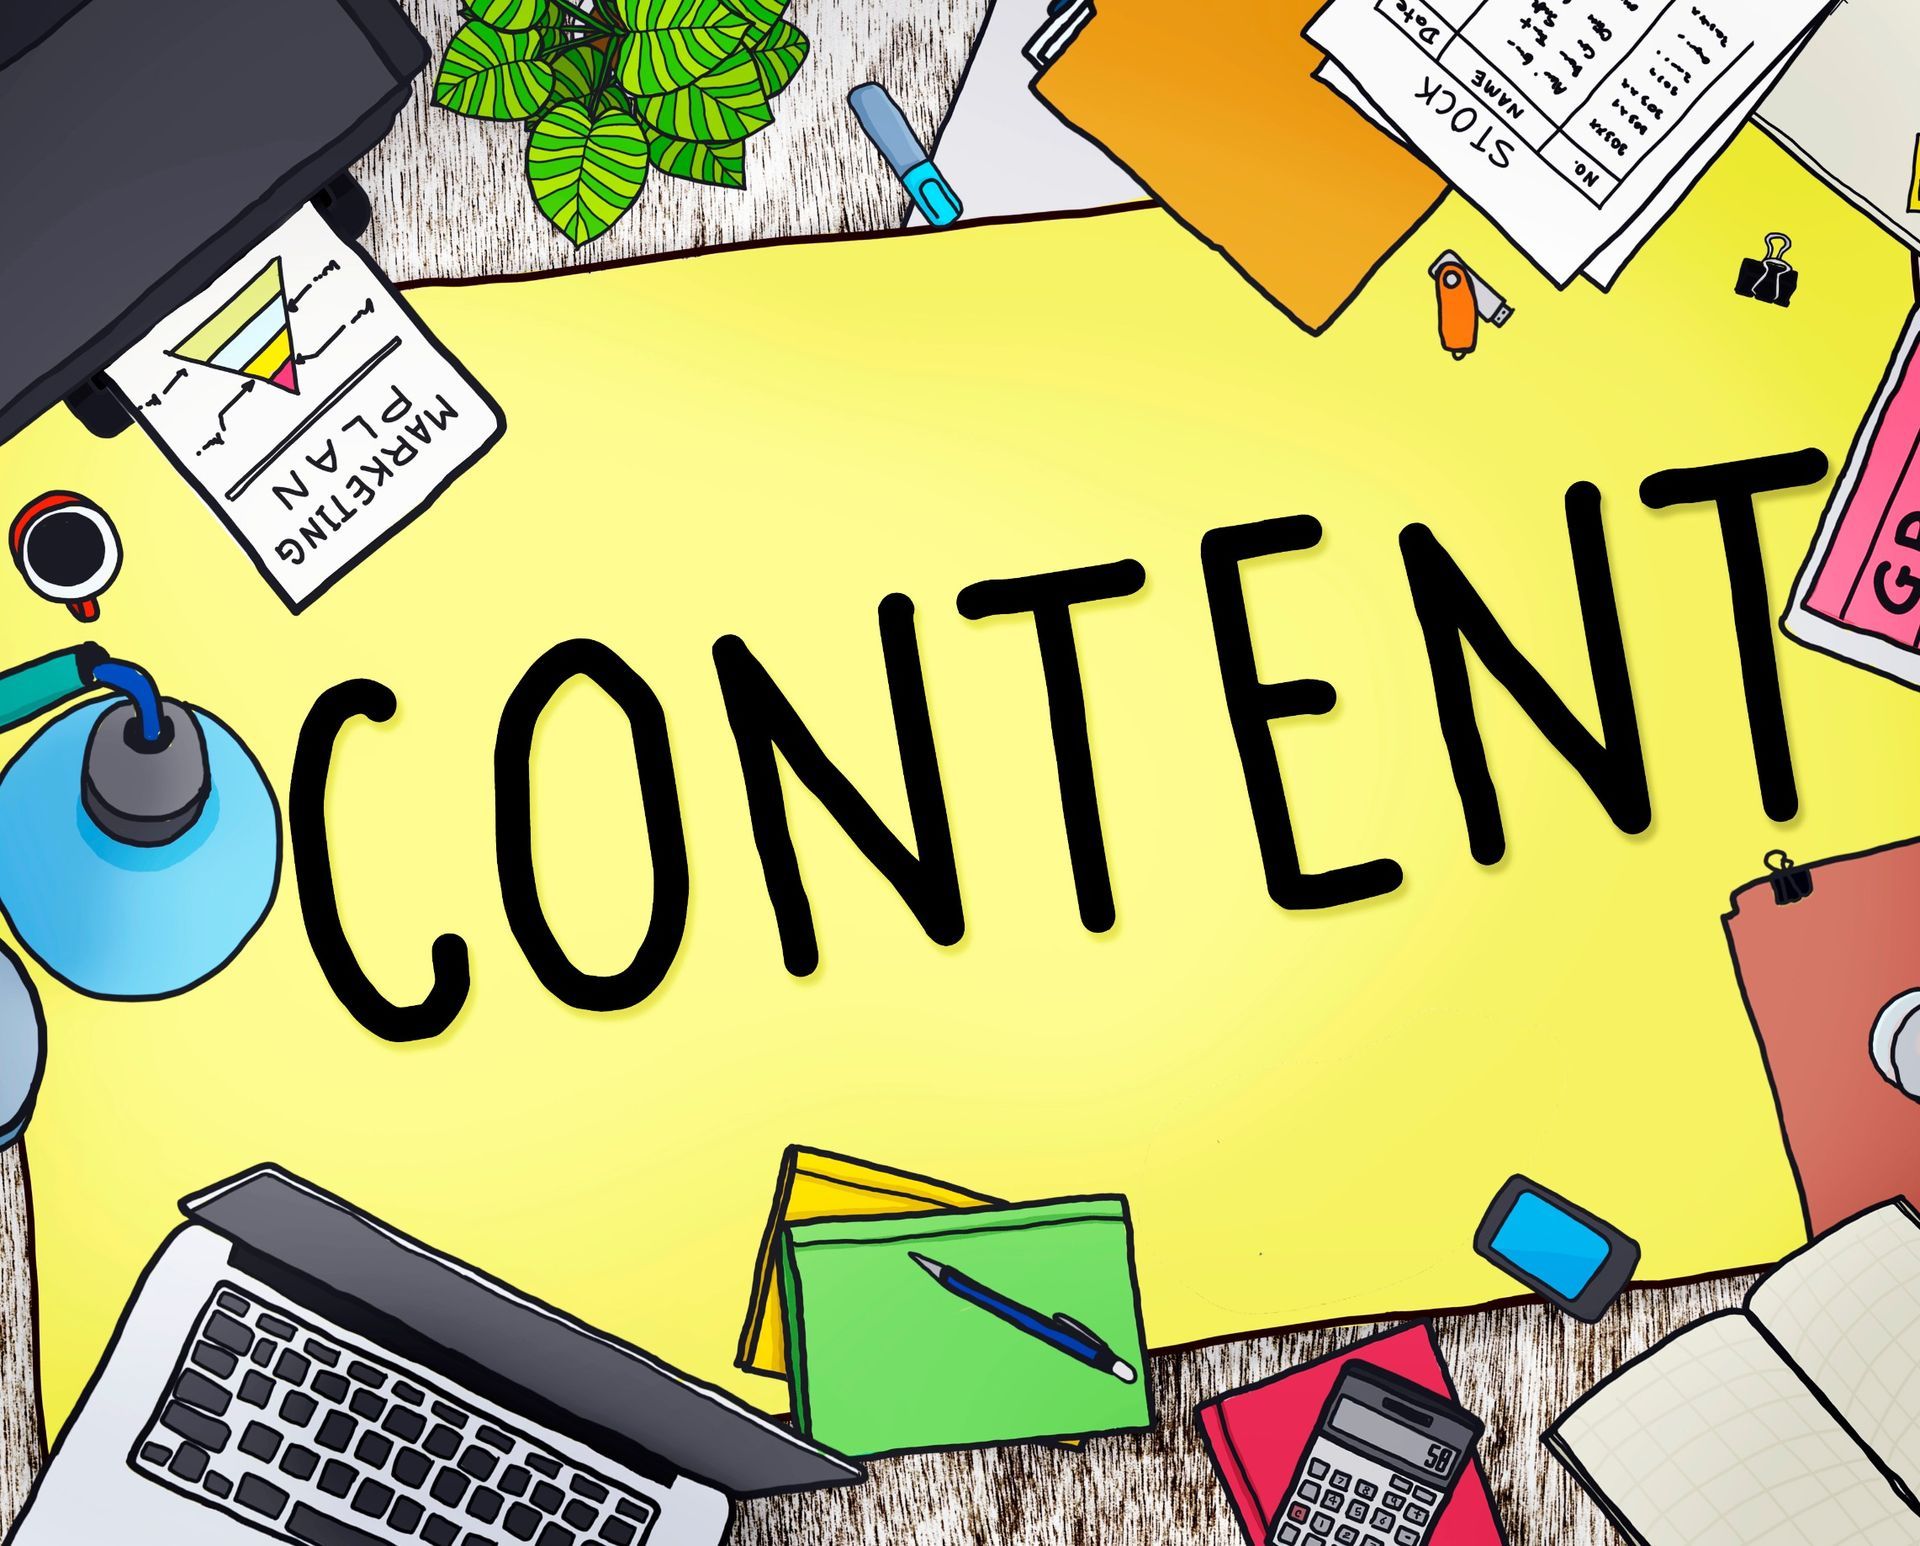 How to Create Good Social Media Content